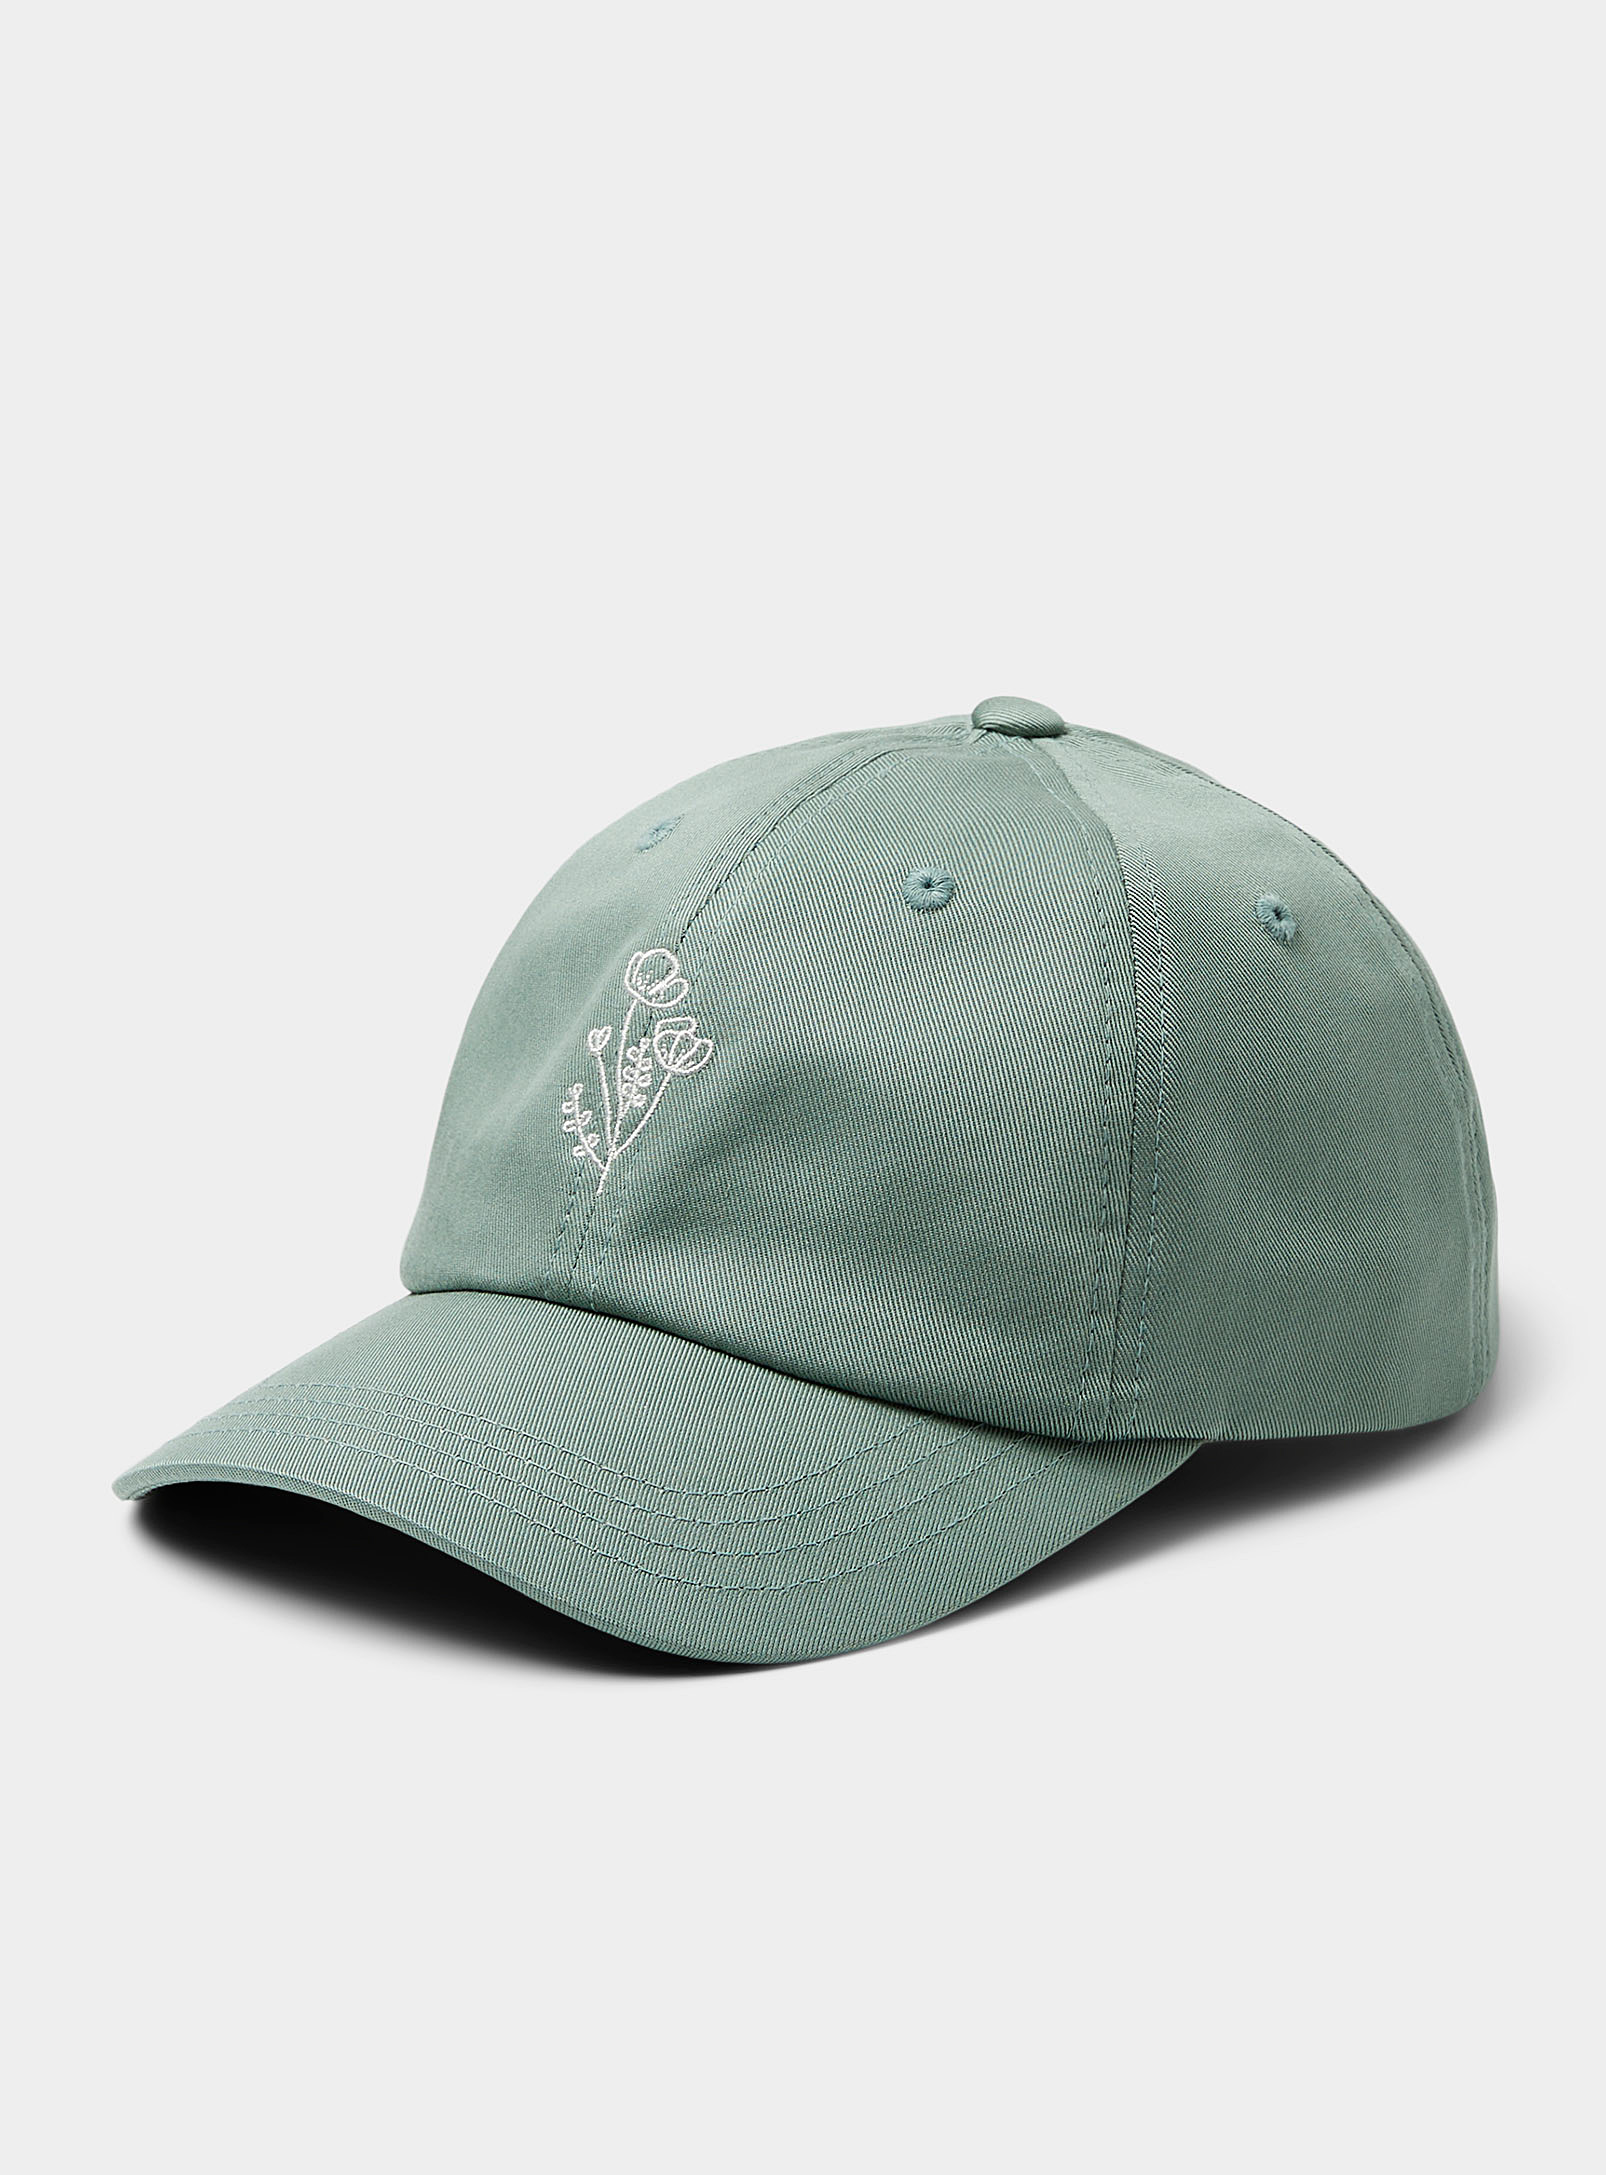 Tentree - Men's Embroidered-flower cap